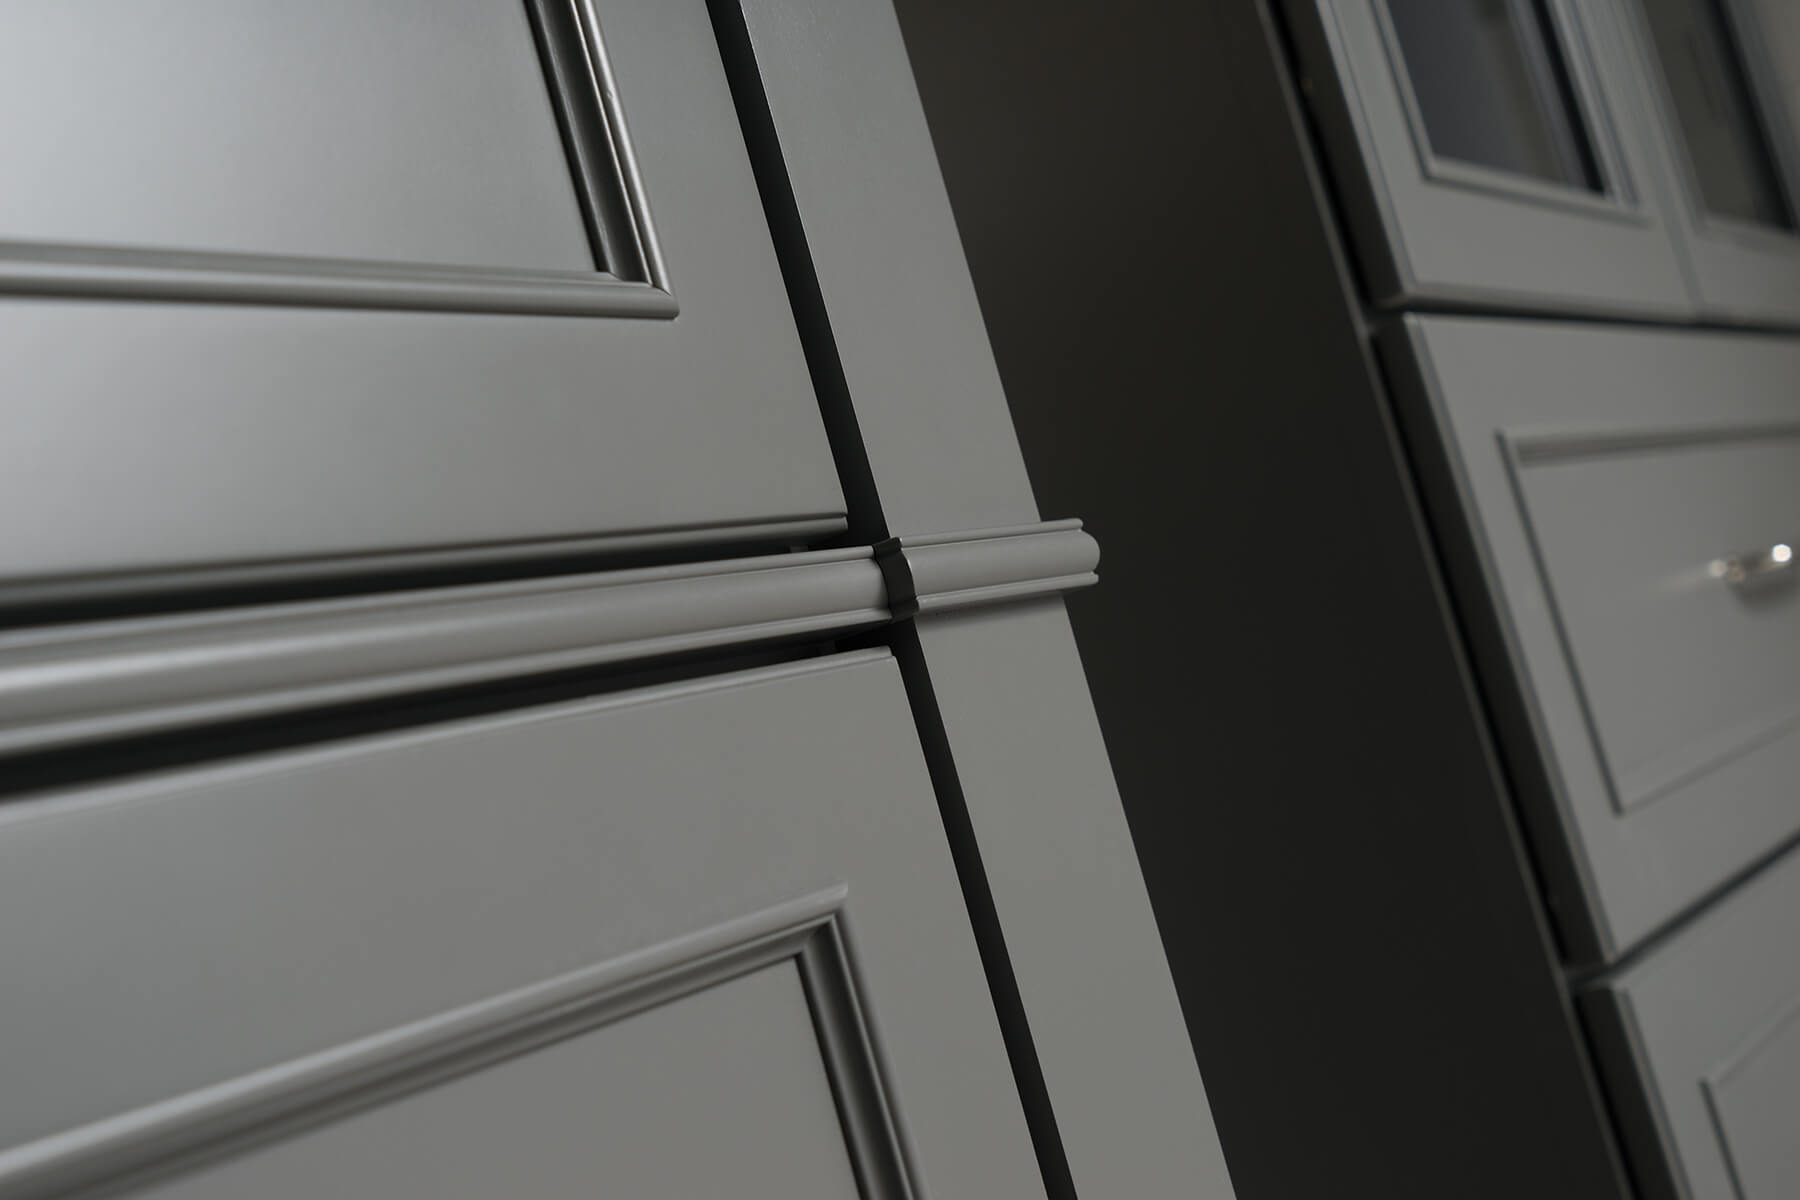 Dark gray painted bathroom vanity cabinets from Dura Supreme Cabinetry.